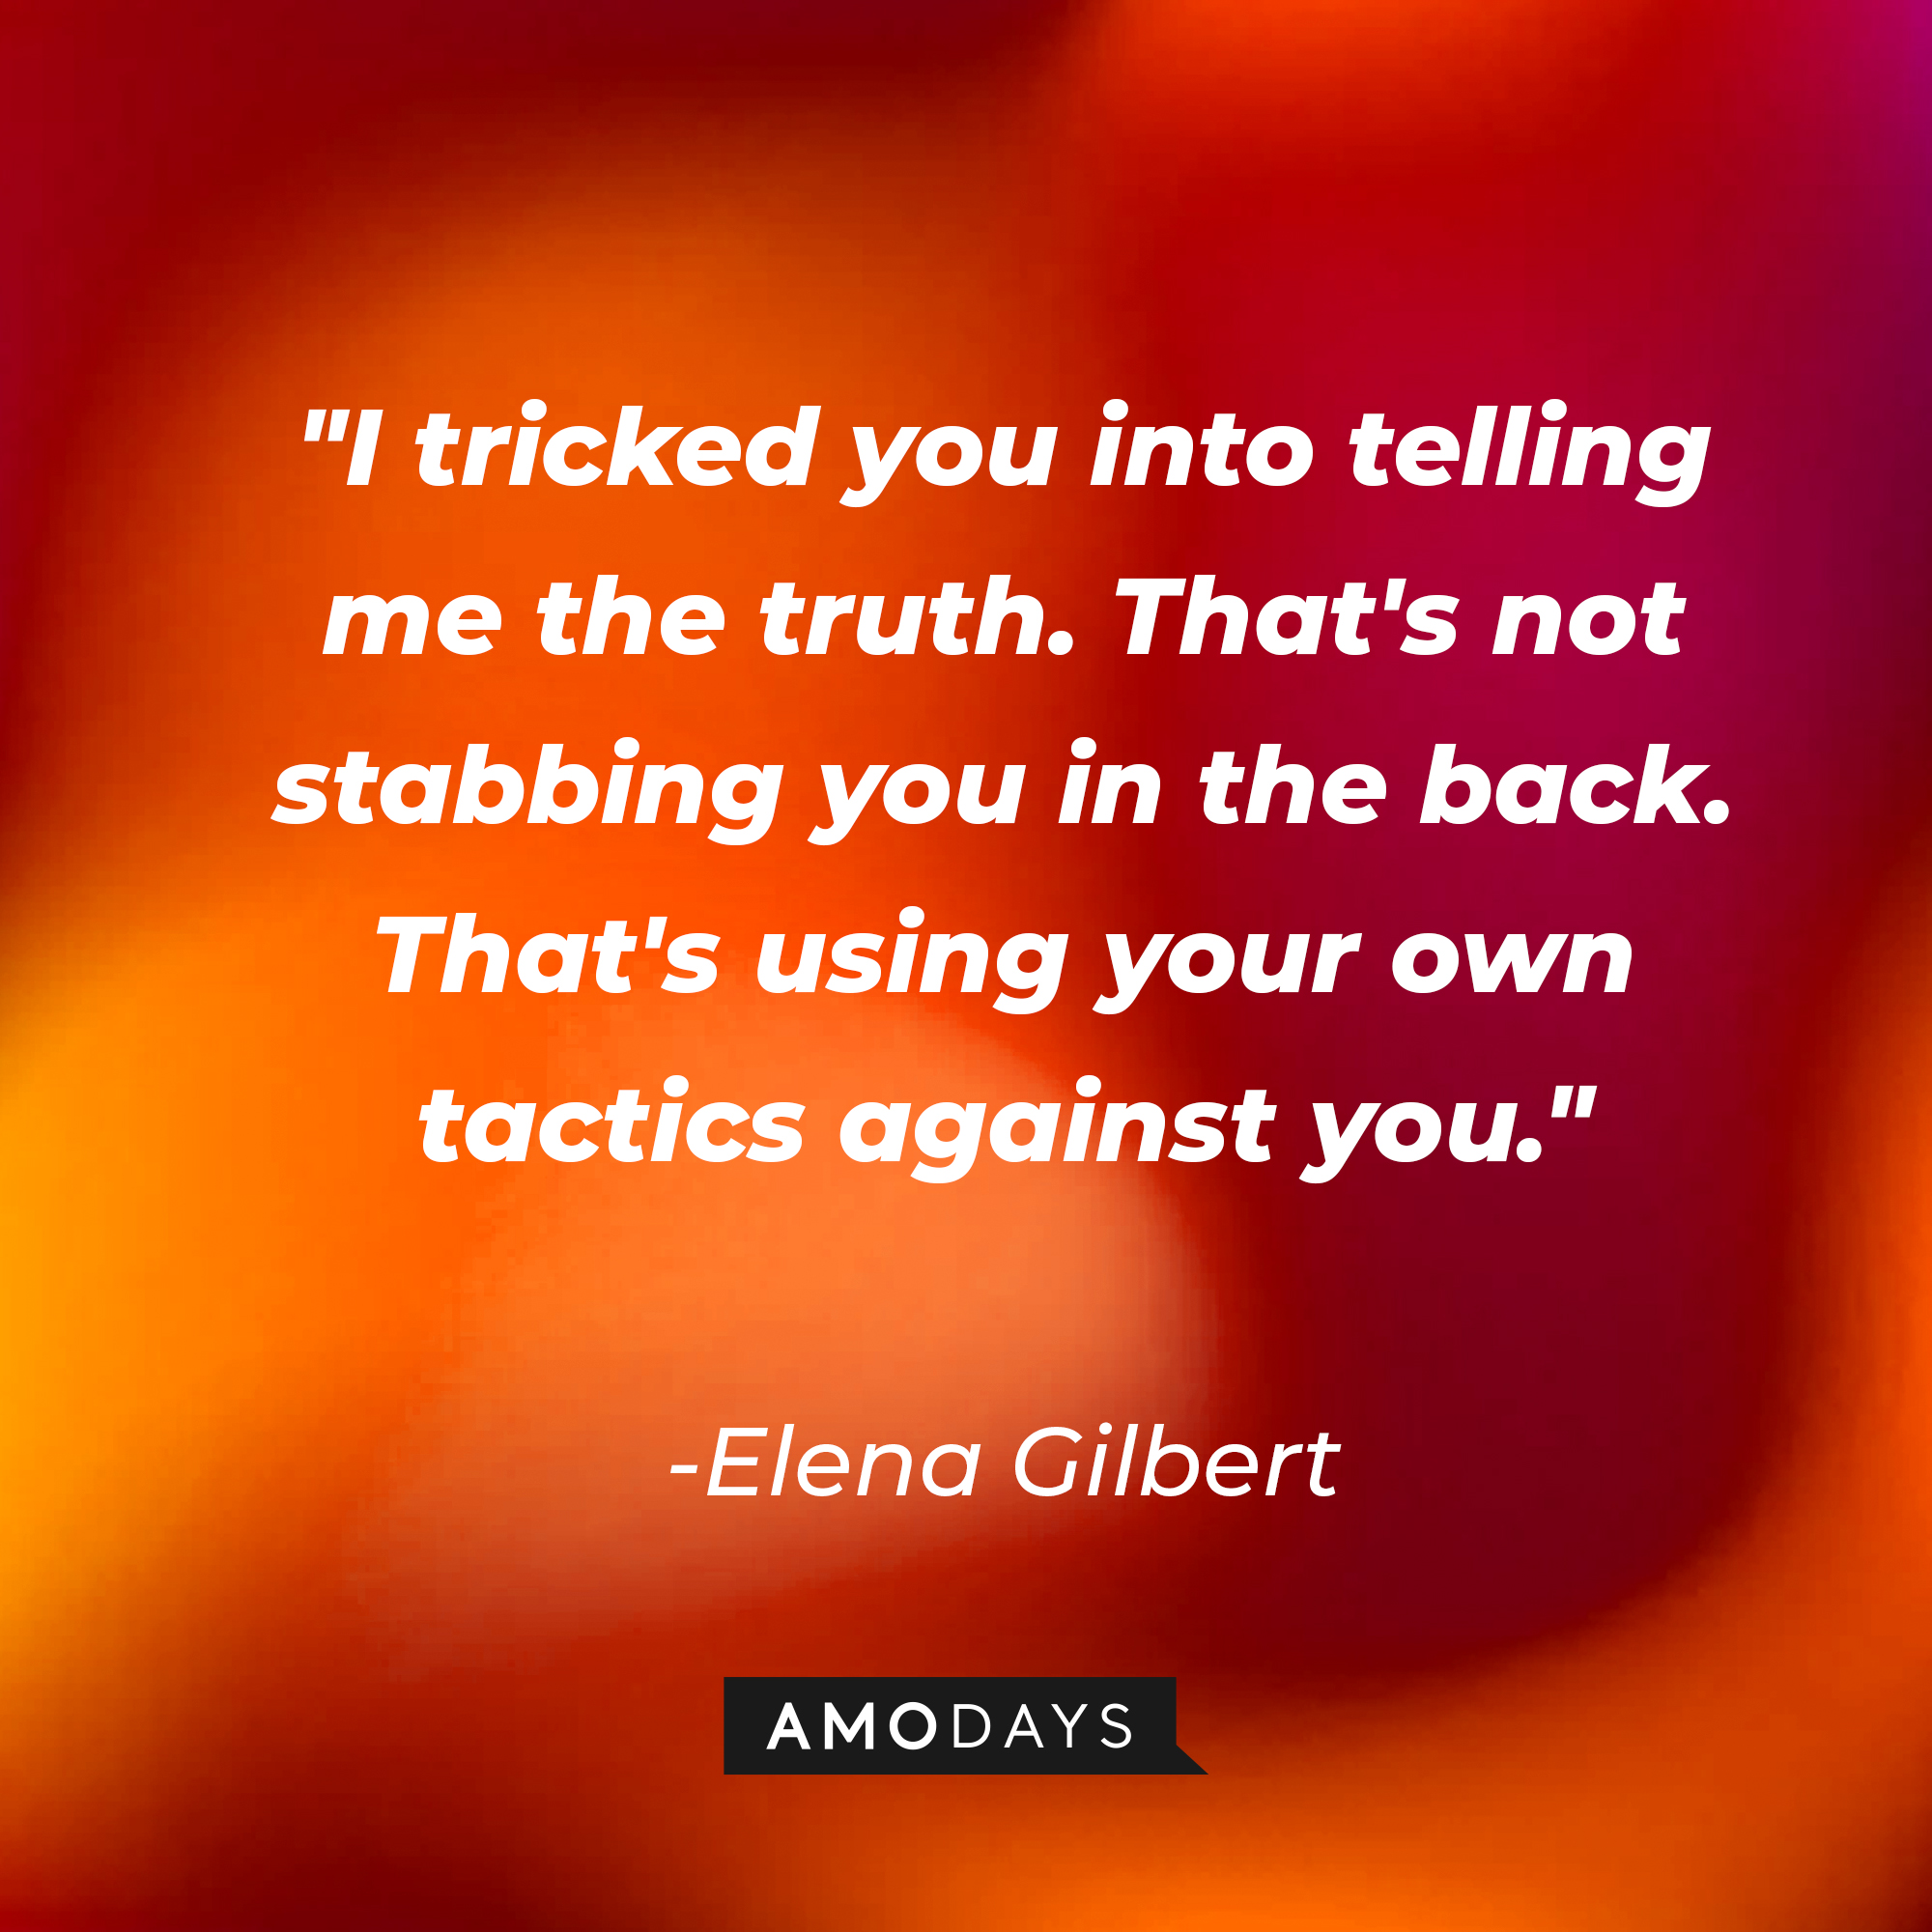 Elena Gilbert's quote: "I tricked you into telling me the truth. That's not stabbing you in the back. That's using your own tactics against you." | Image: AmoDays